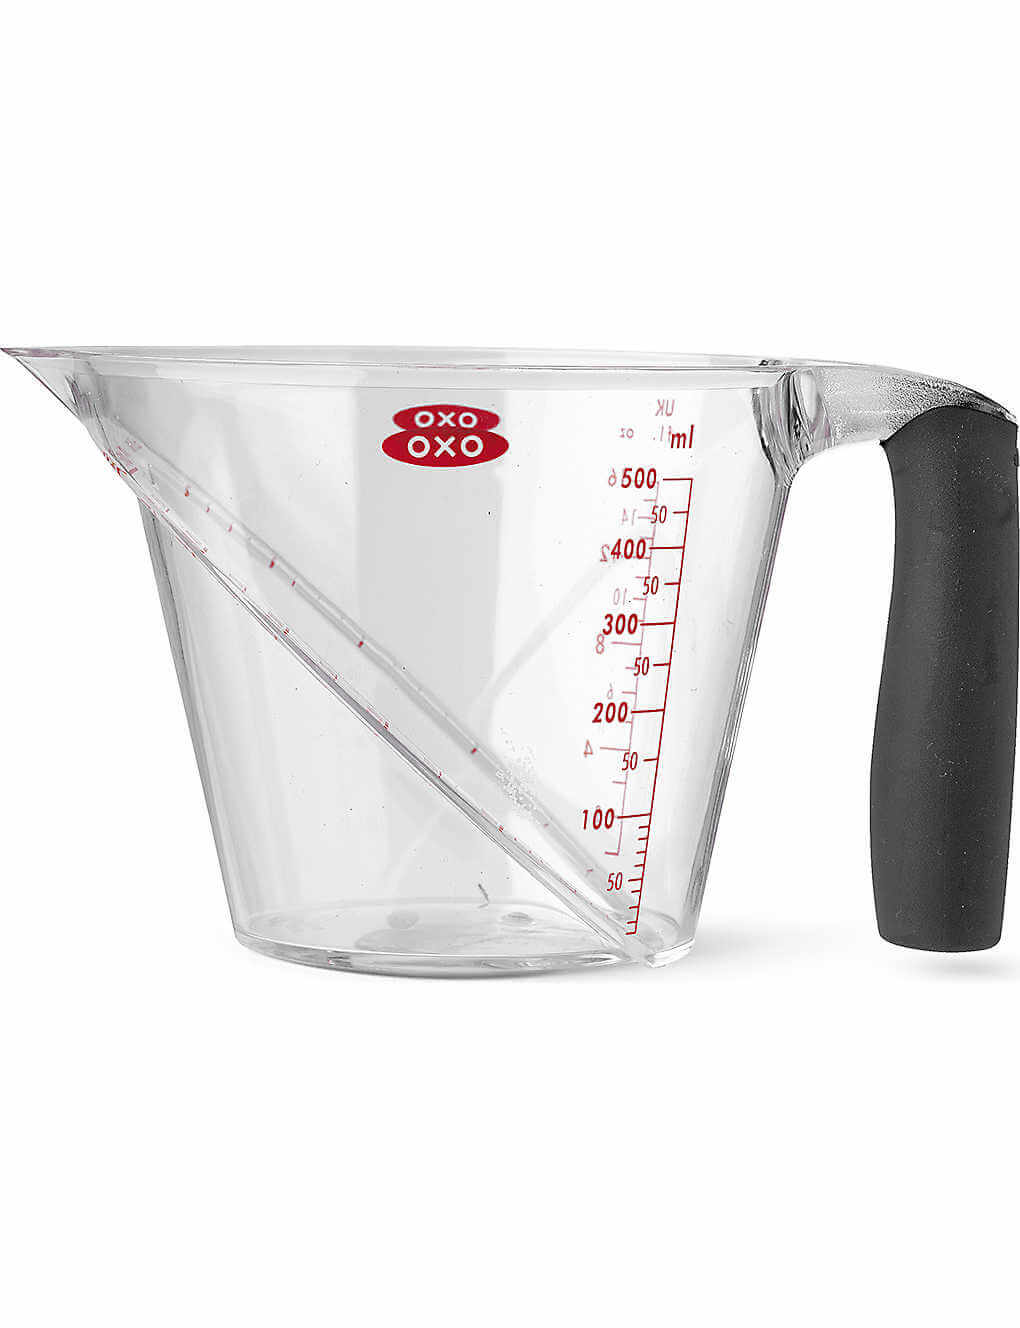 Plastic overmolding - OXO Good Grips measuring cup